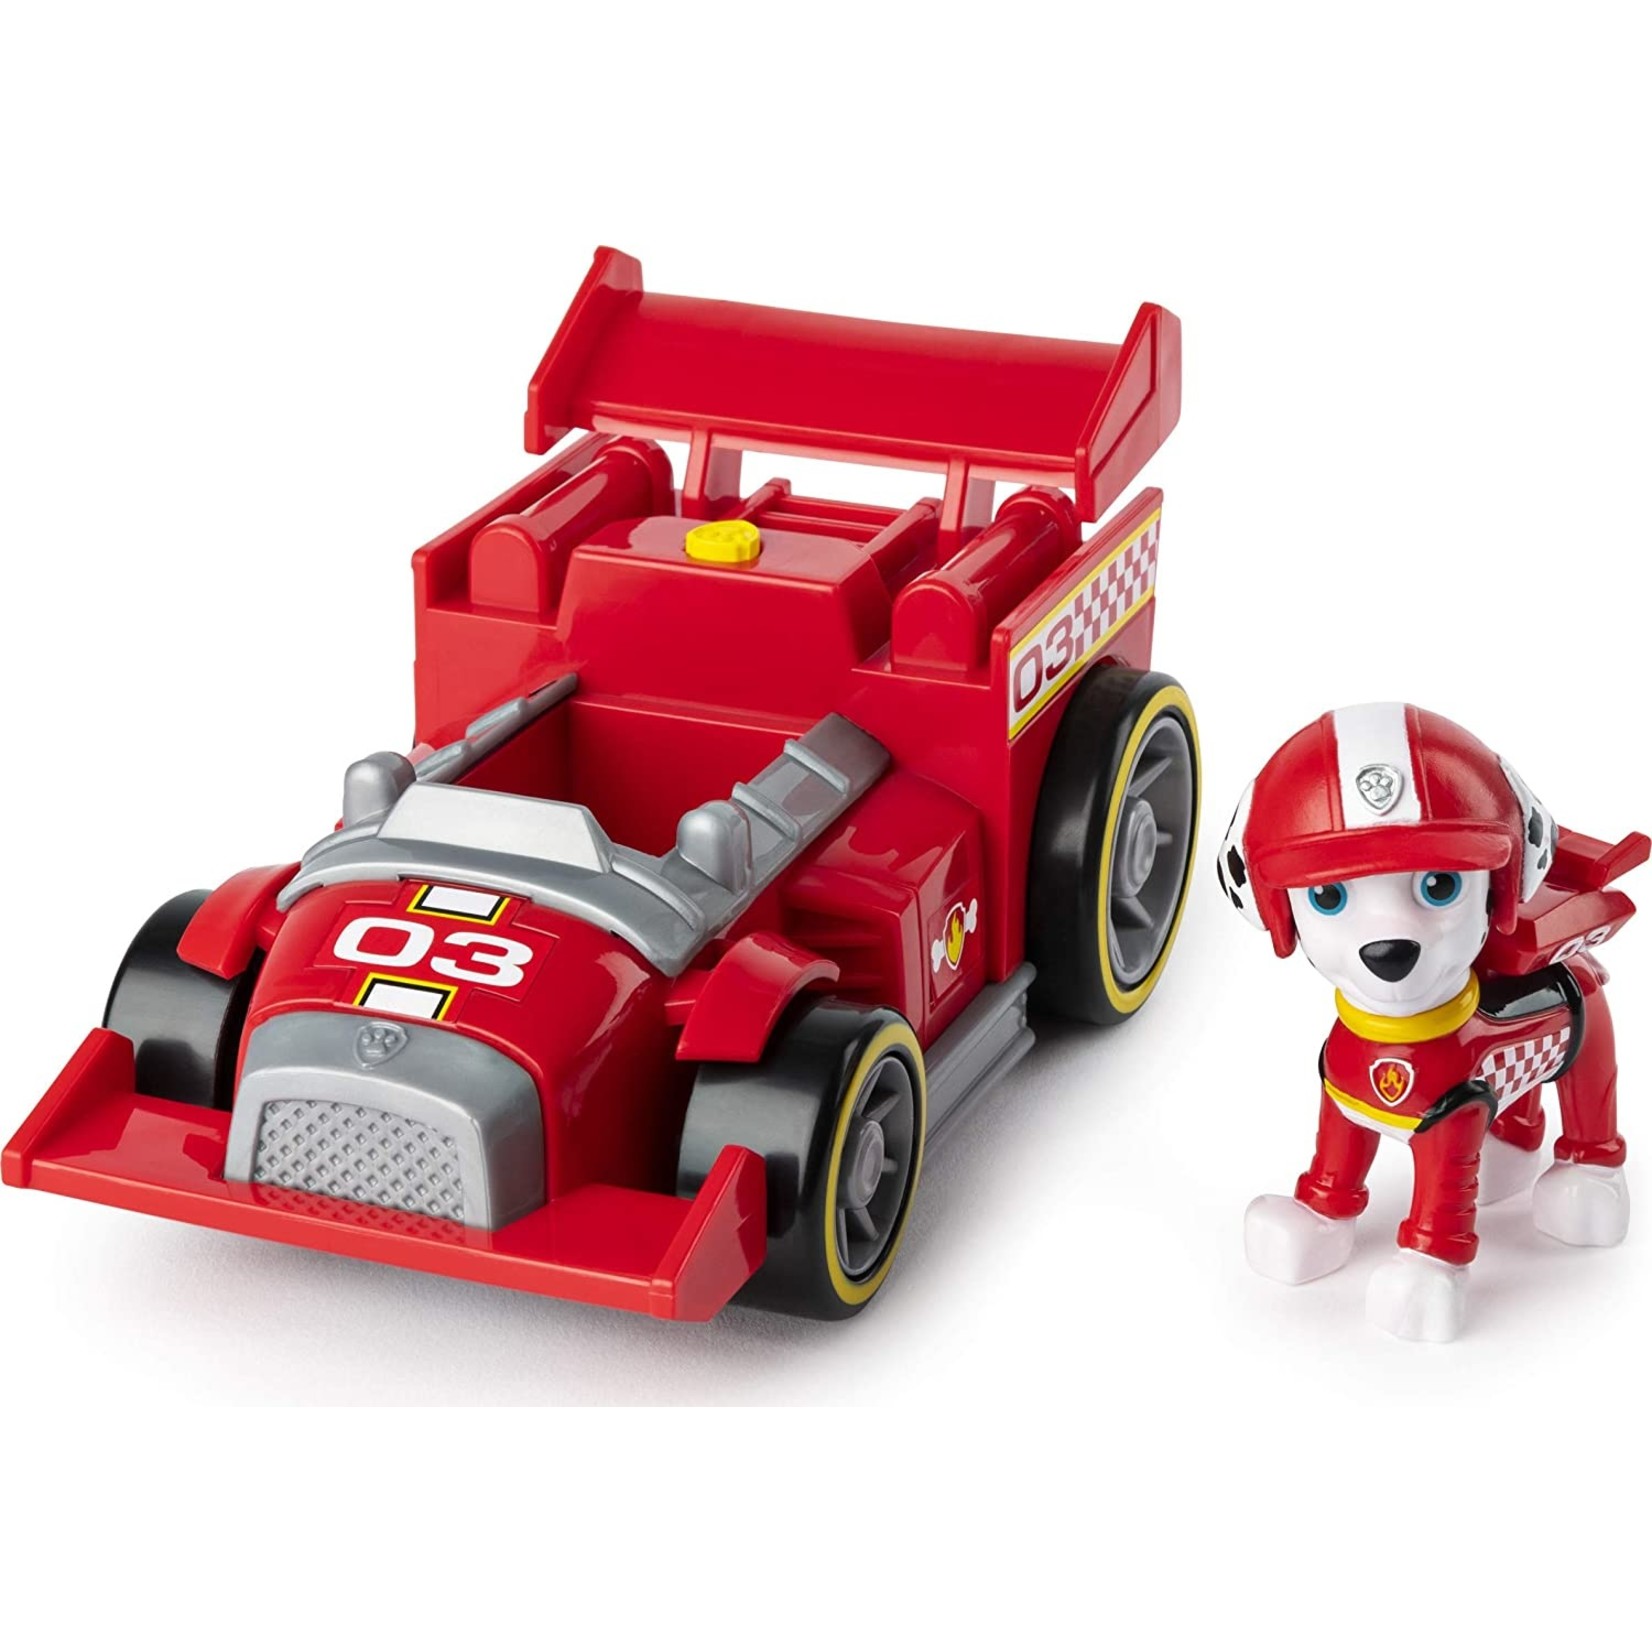 Spin Master Paw patrol Race Rescue Marshall